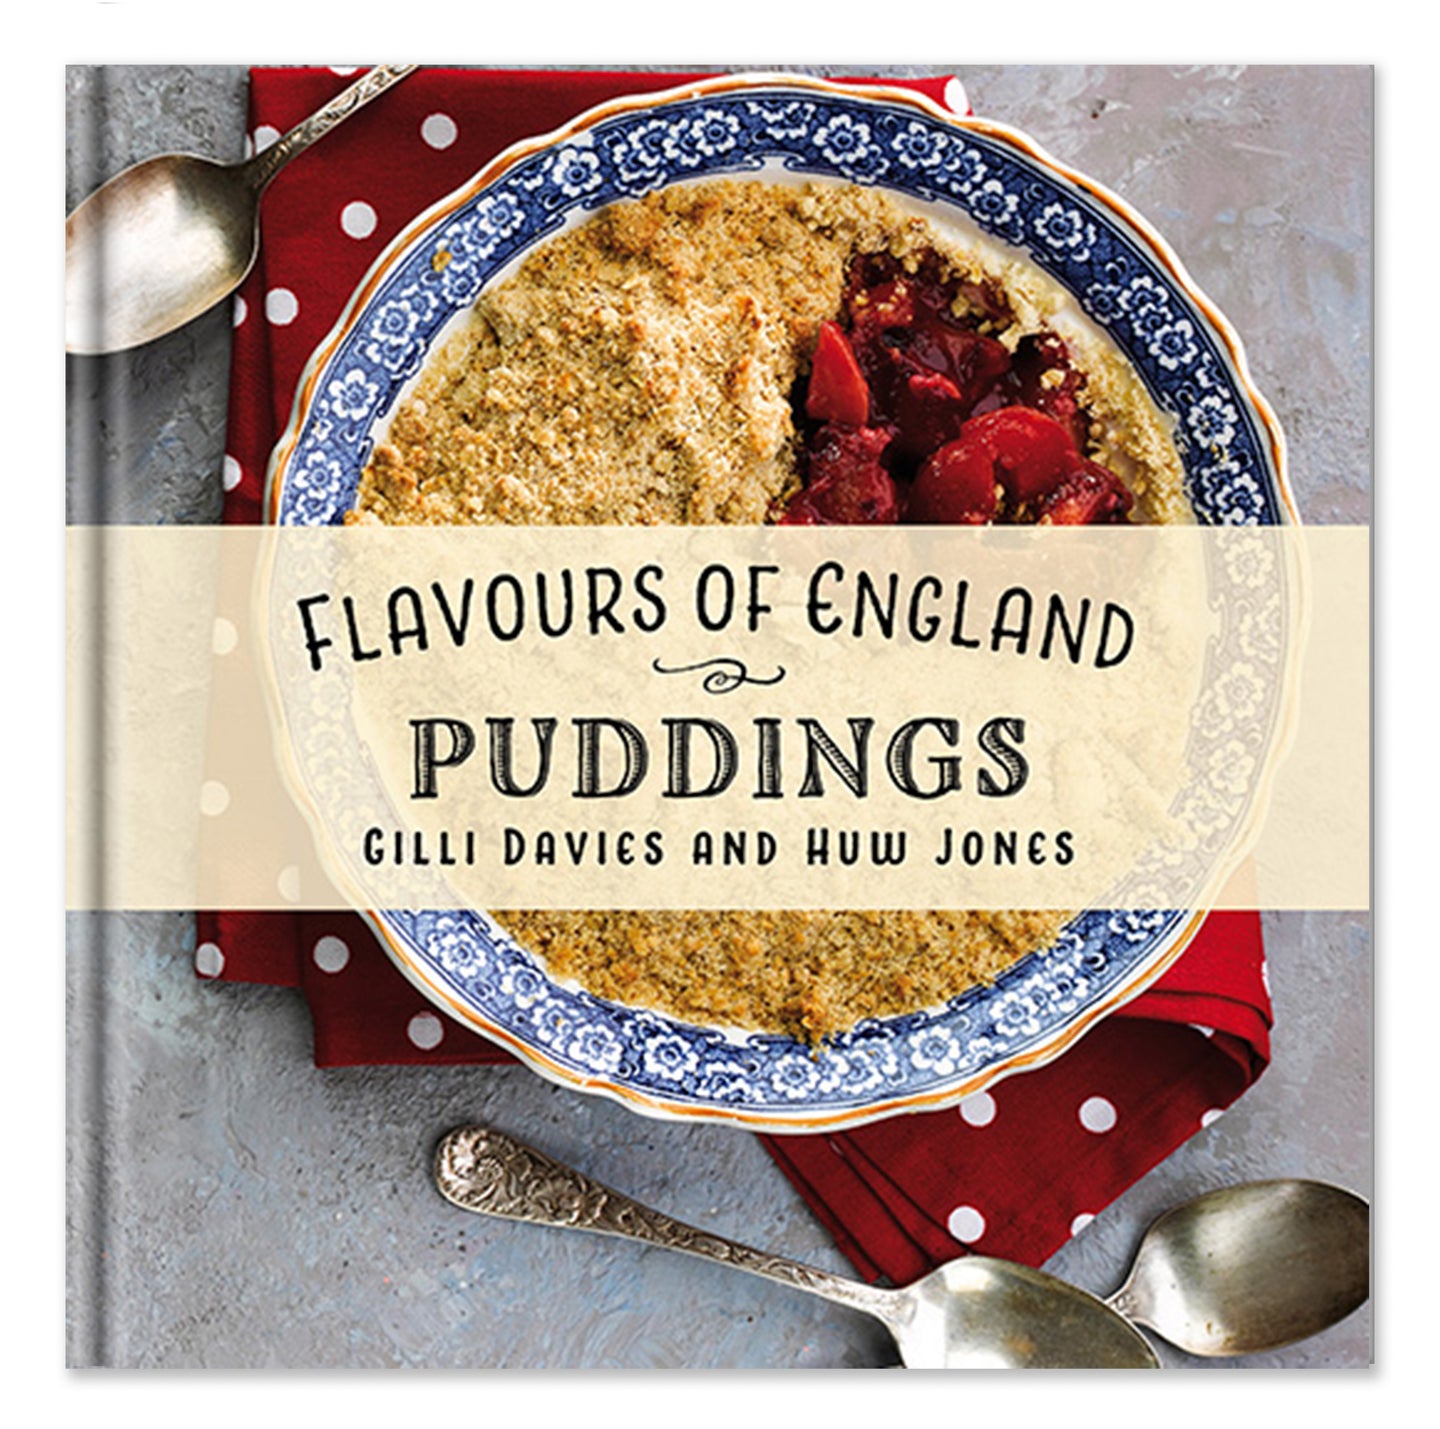 Flavours of England Puddings Gilli Davies Huw Jones published by Graffeg